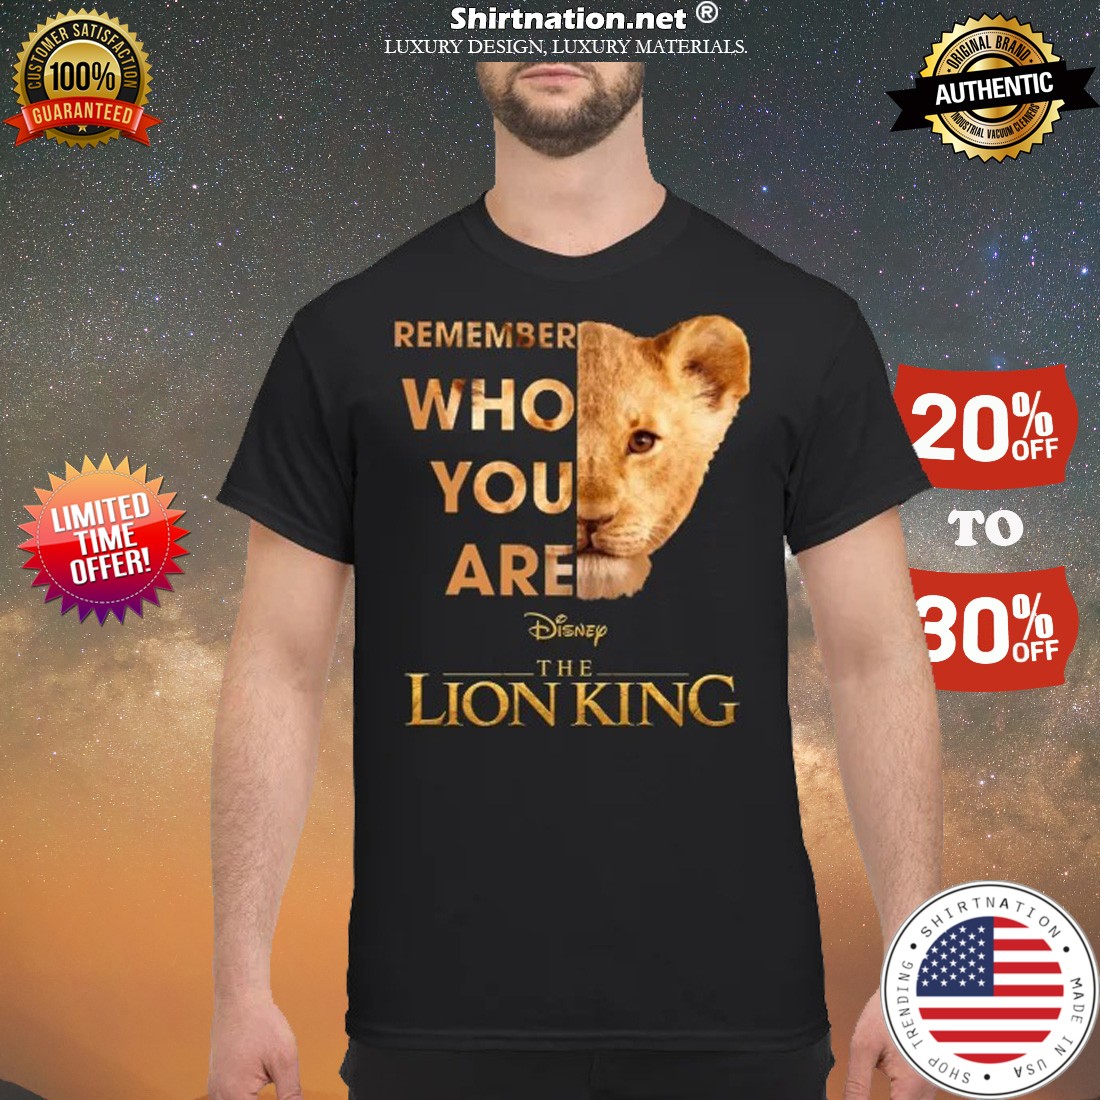 Remember who you are Disney lion king shirt